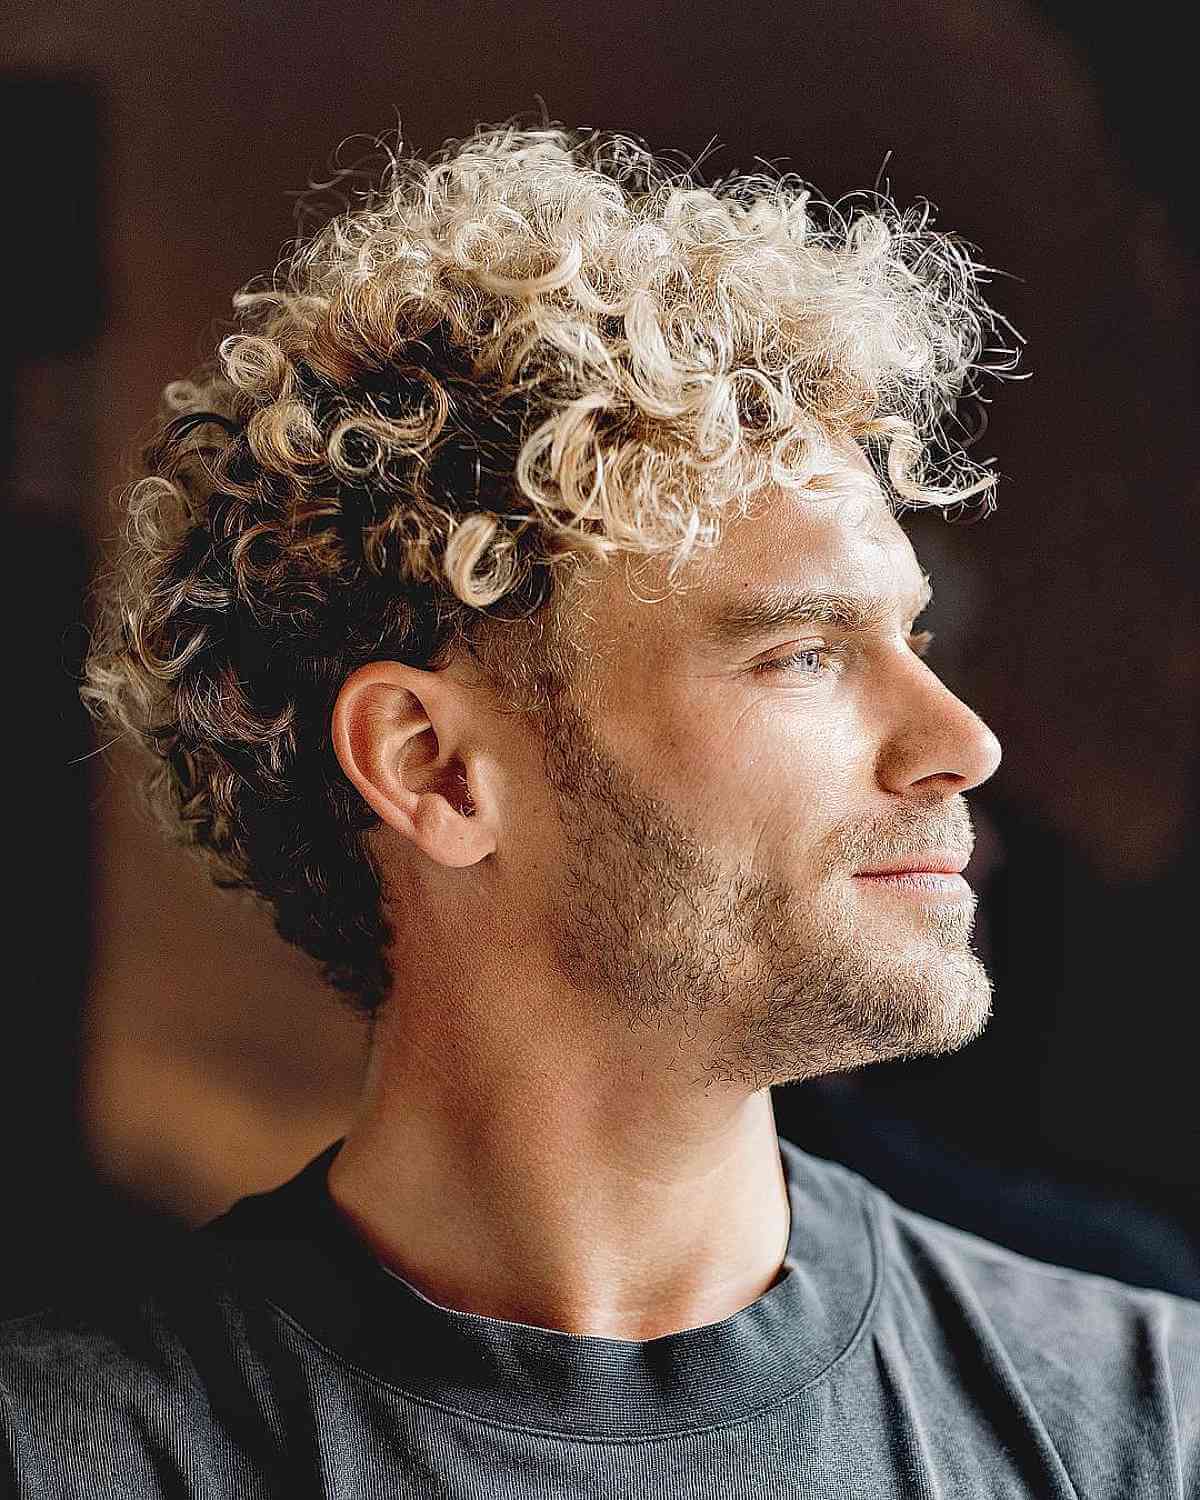 Hair Color For Men: 35 Examples Ranging From Vivids To Natural Hues